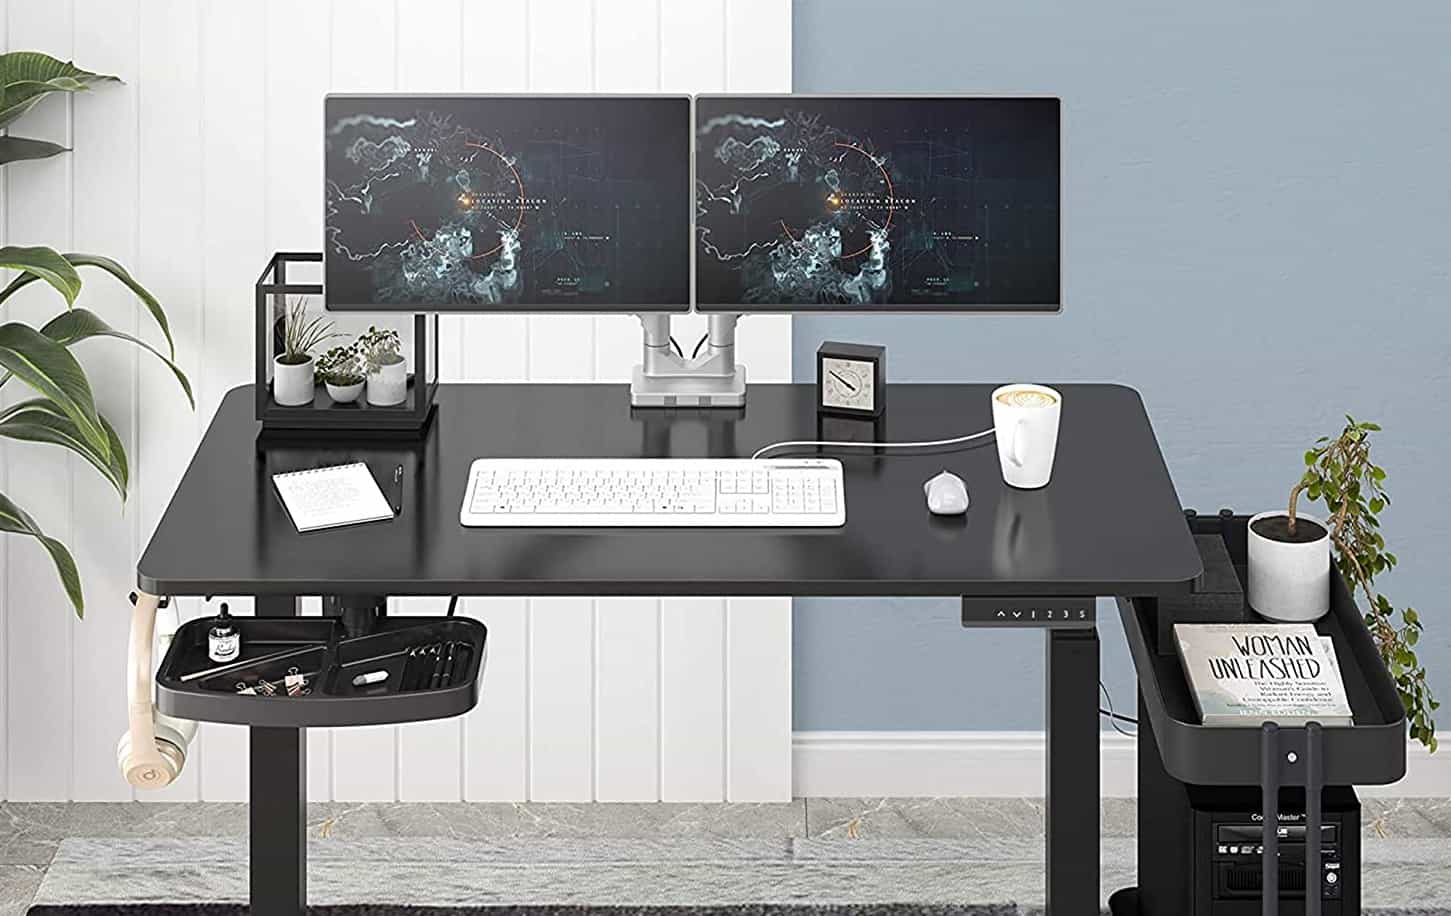 How to Add a Keyboard Attachment to a Standing Desk